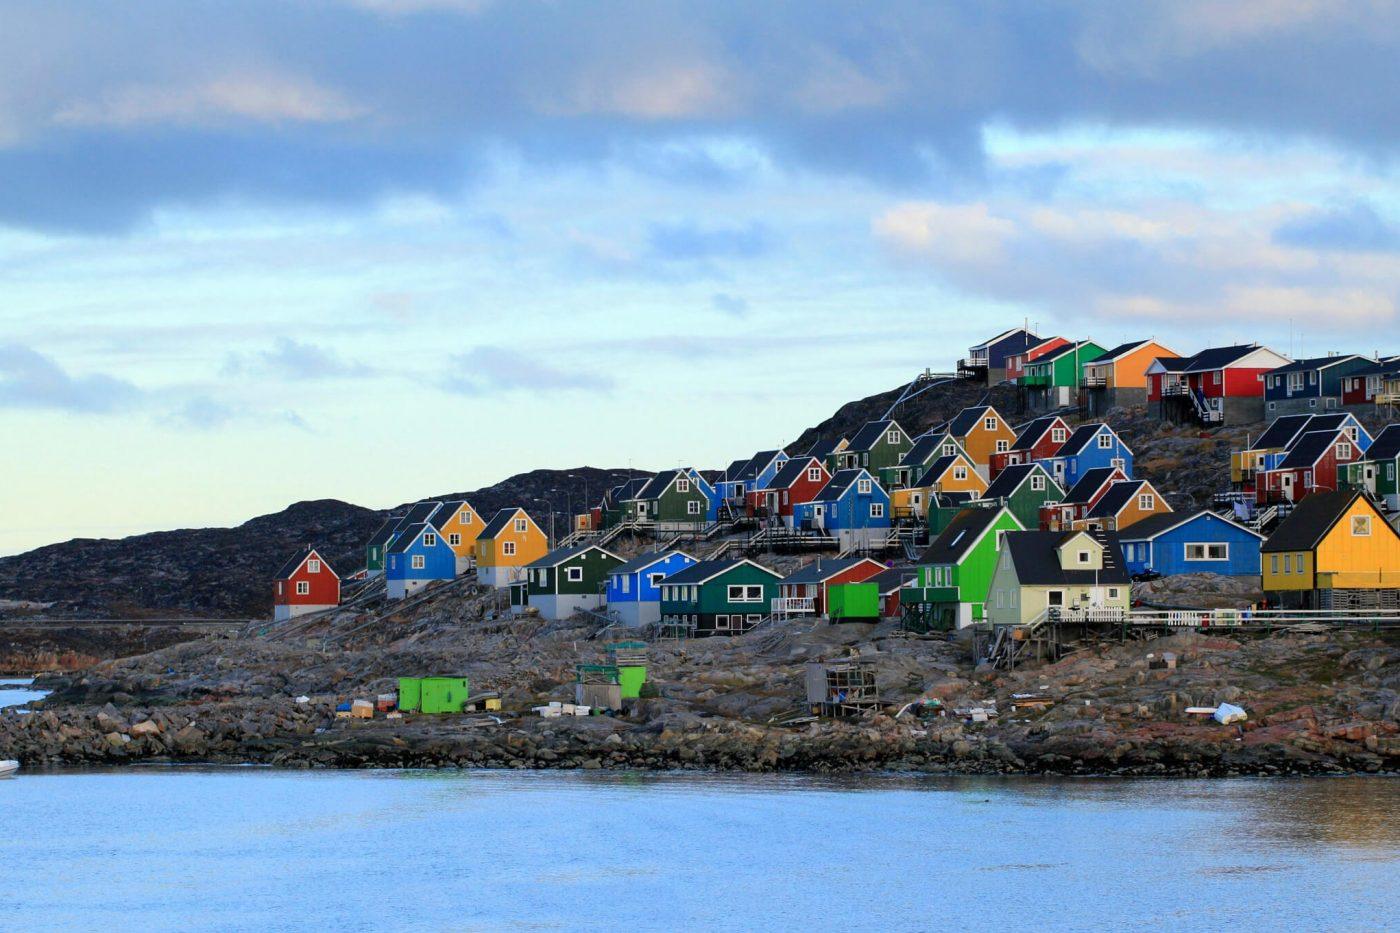 Houses in Aasiaat. Photo by Magssannguaq Qujaukitsoq.